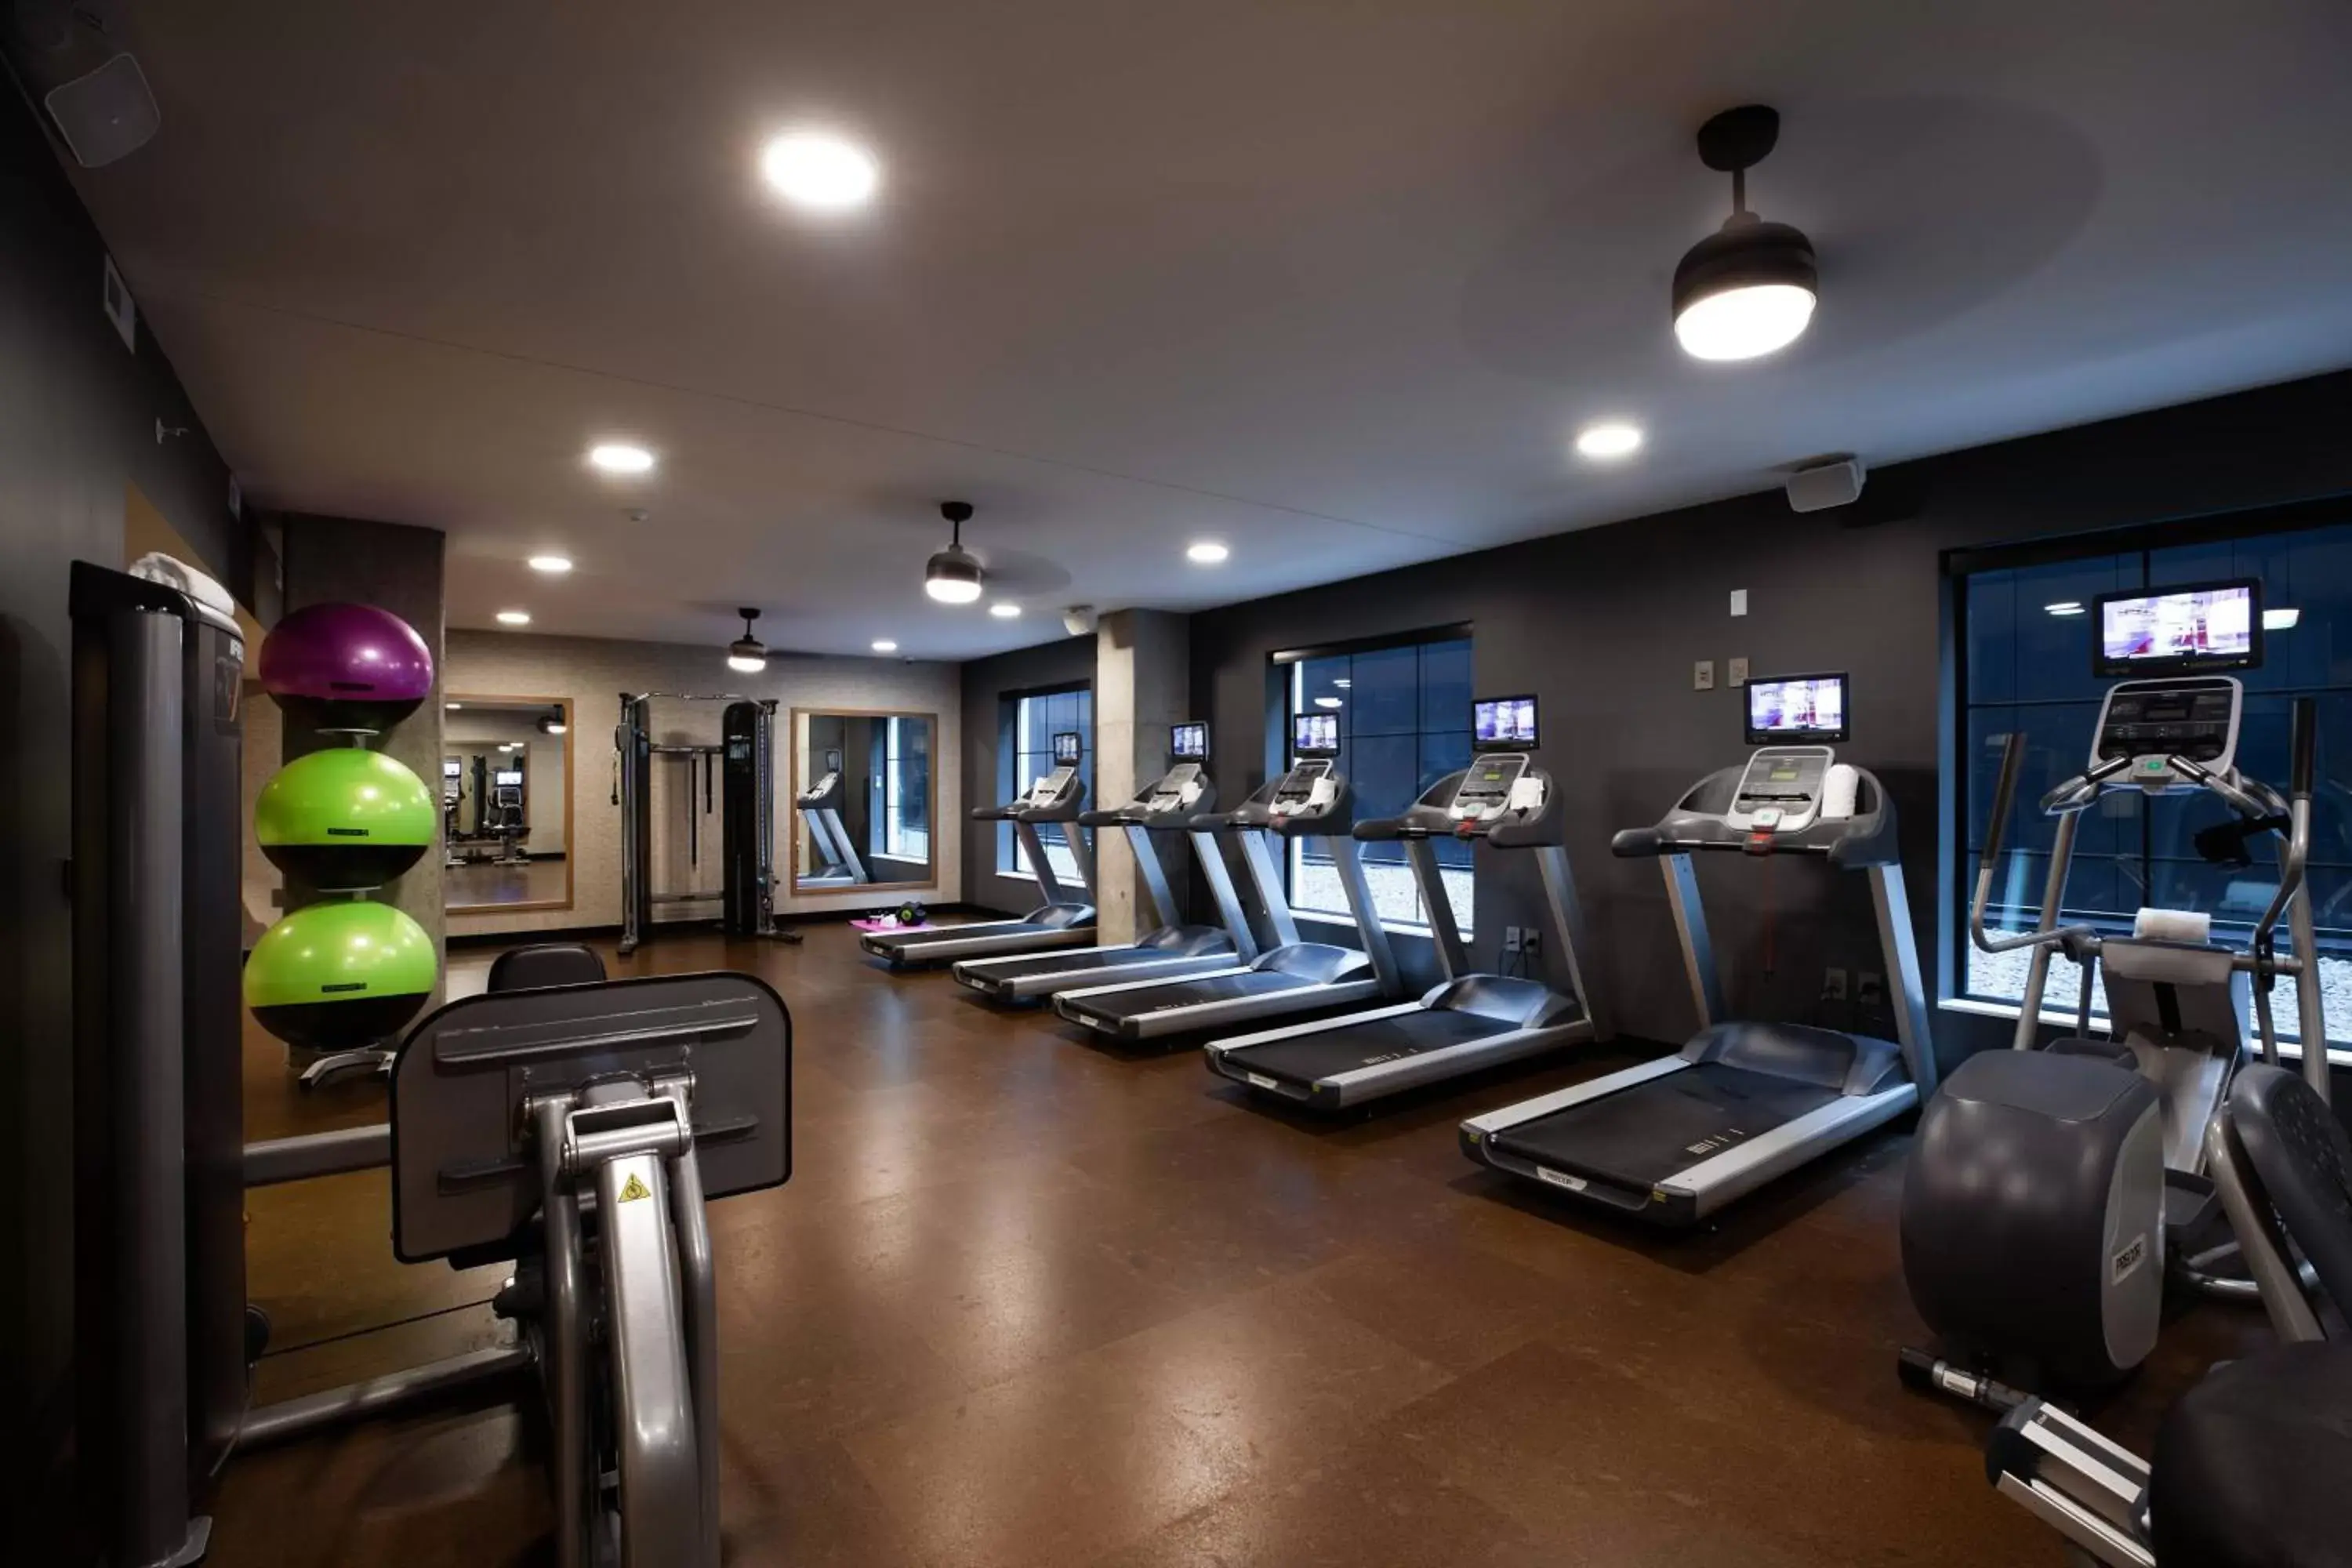 Fitness centre/facilities, Fitness Center/Facilities in Elliot Park Hotel, Autograph Collection